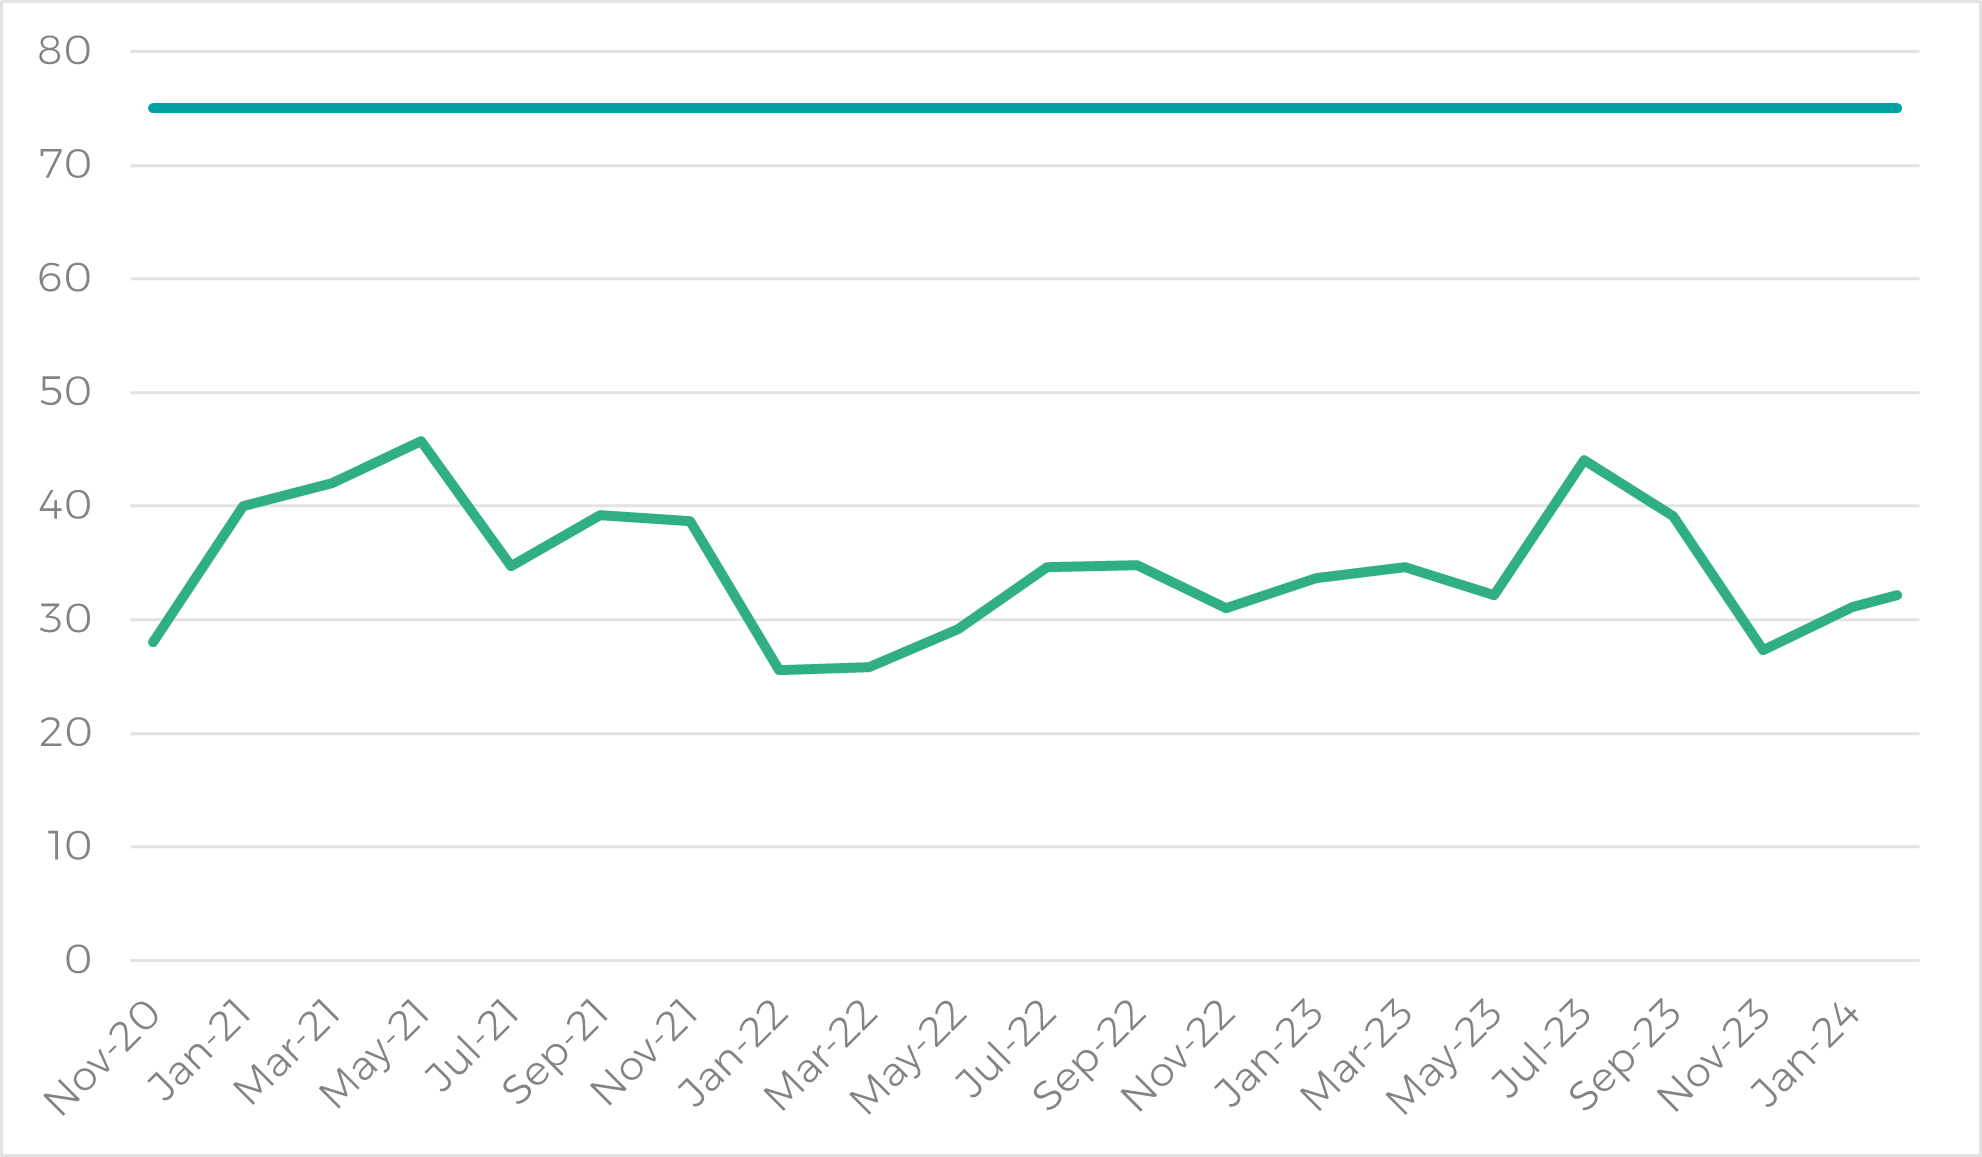 The graph shows a clear underperformance in meeting the 62-day threshold for starting treatment for gynaecological cancer. 